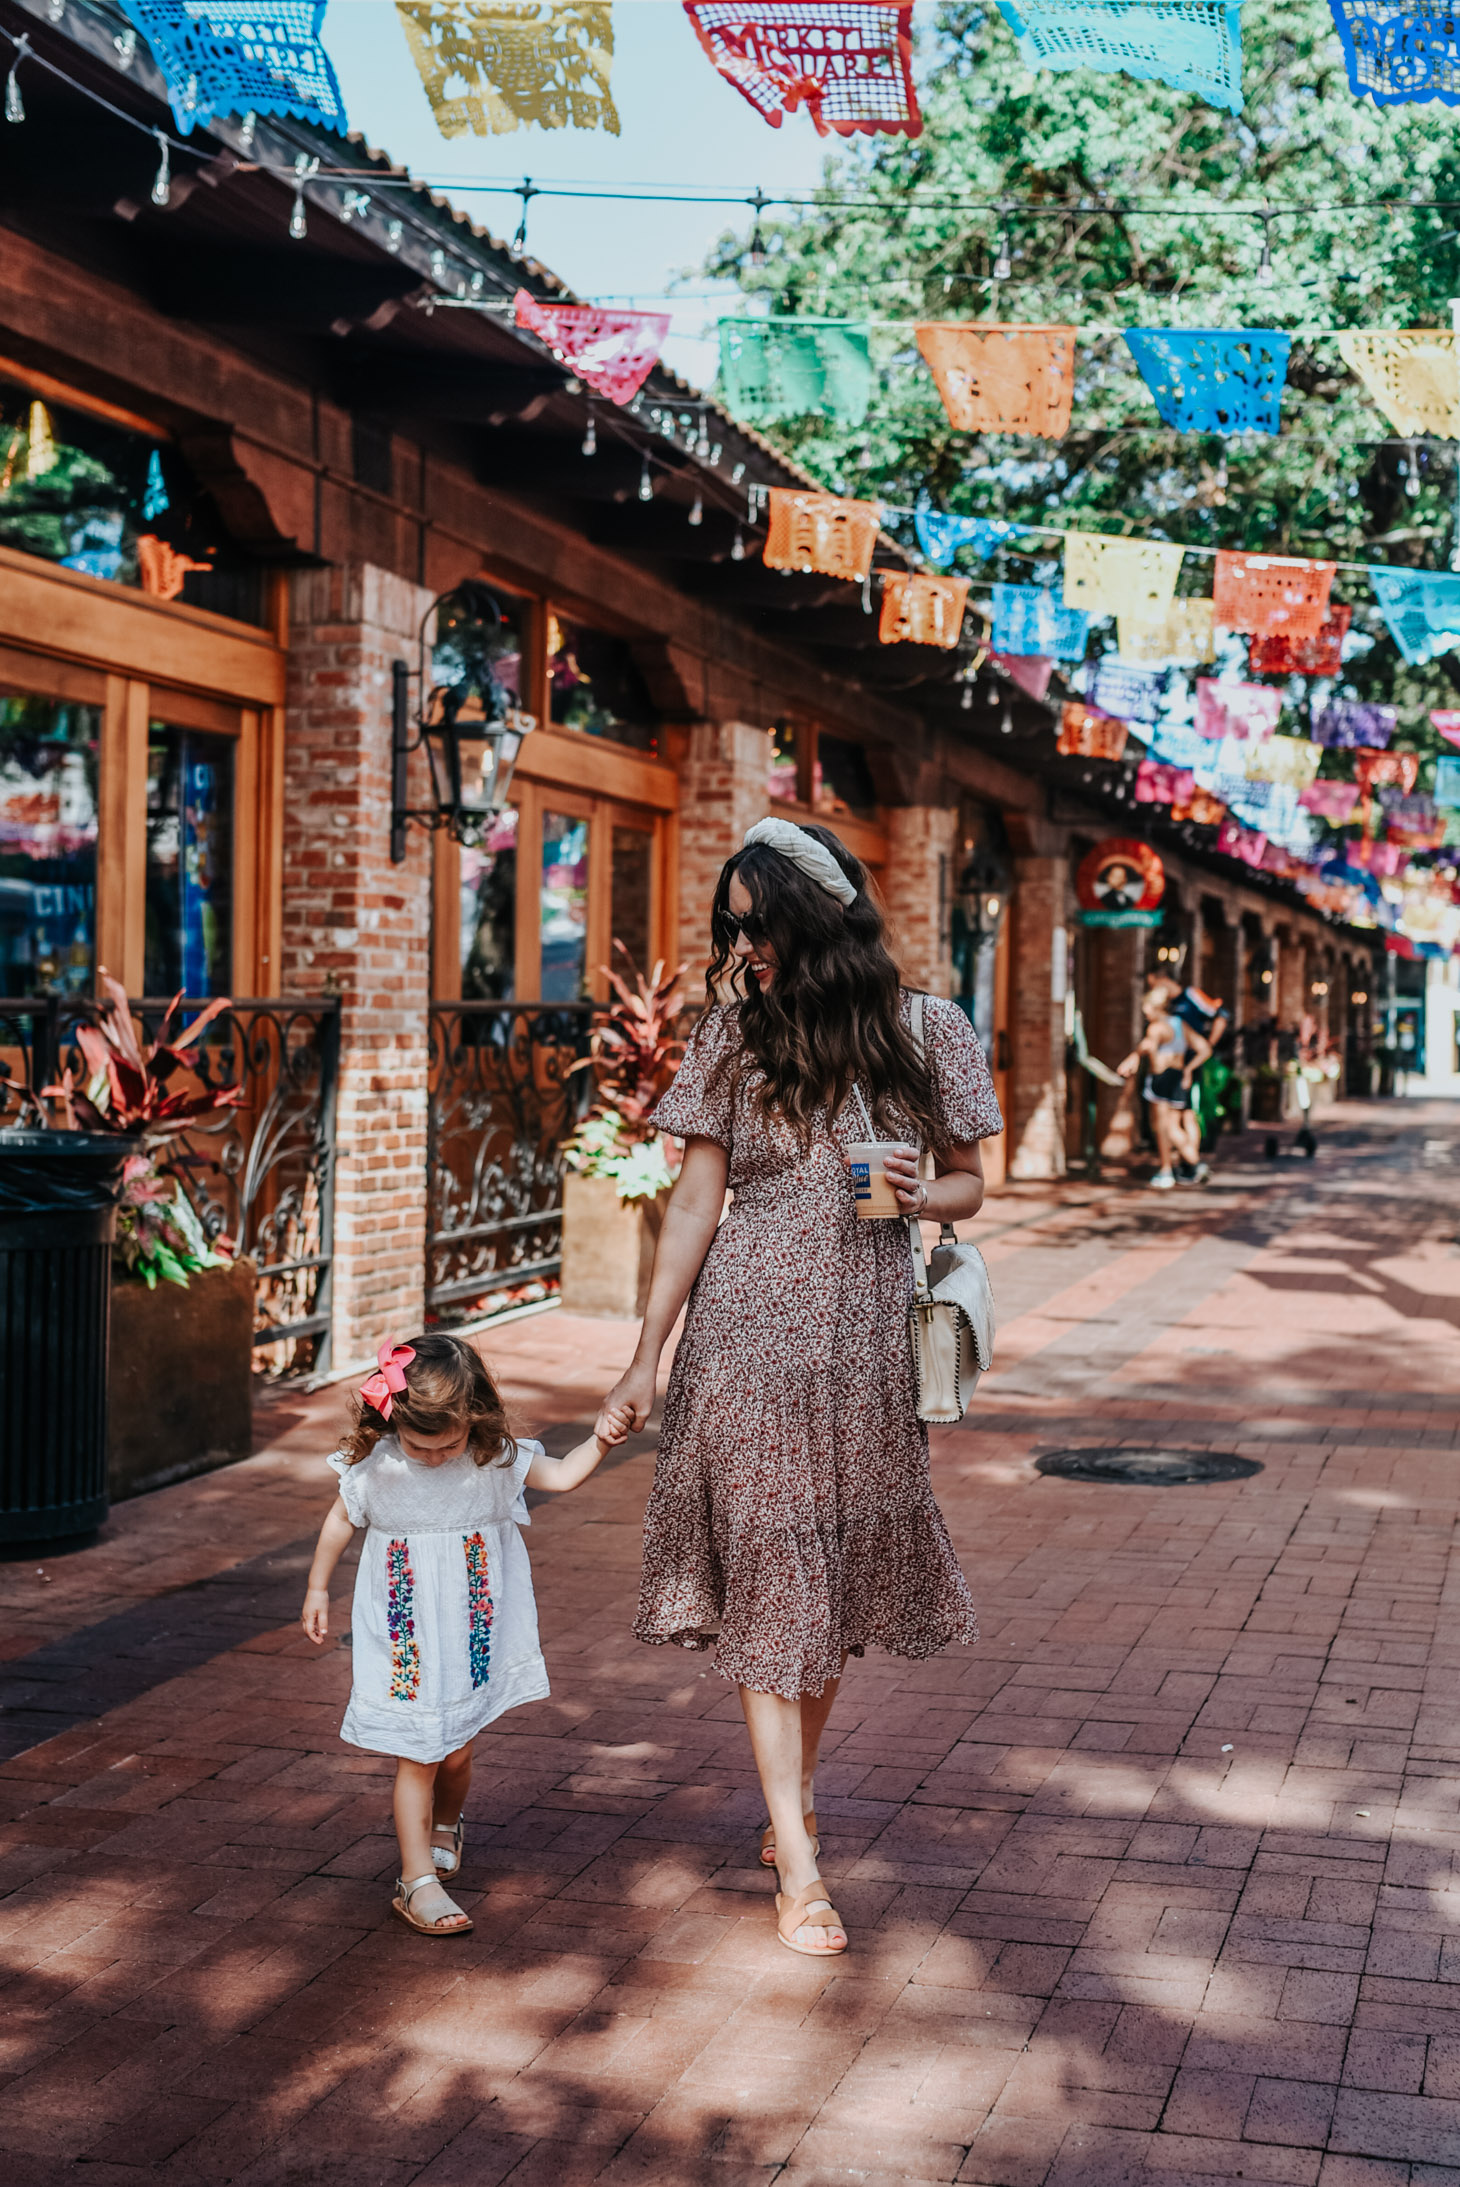 Top 10 Kid Friendly Activities in San Antonio by popular Texas travel blog, Lone Star Looking Glass: image of a a mom and her 2 year old daughter holding hands as they walk through the Historic Market Square in San Antonio, Texas.